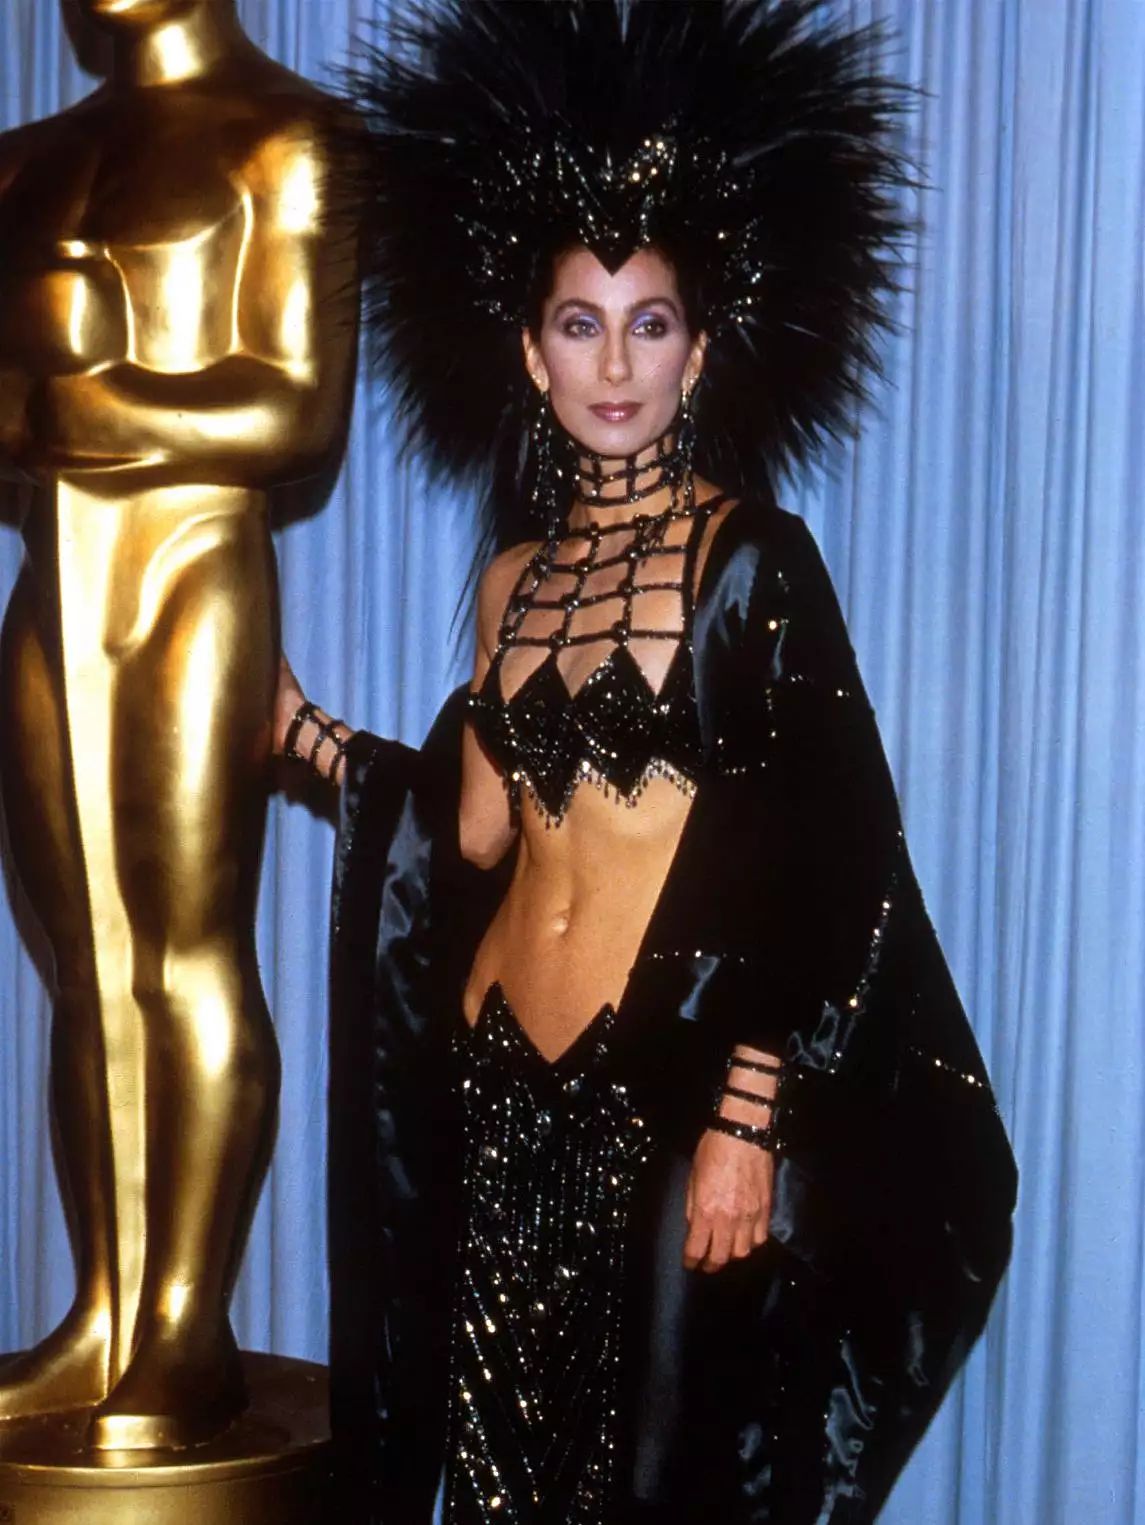 Cher in Bob Mackie for the 58th Academy Awards (1986)